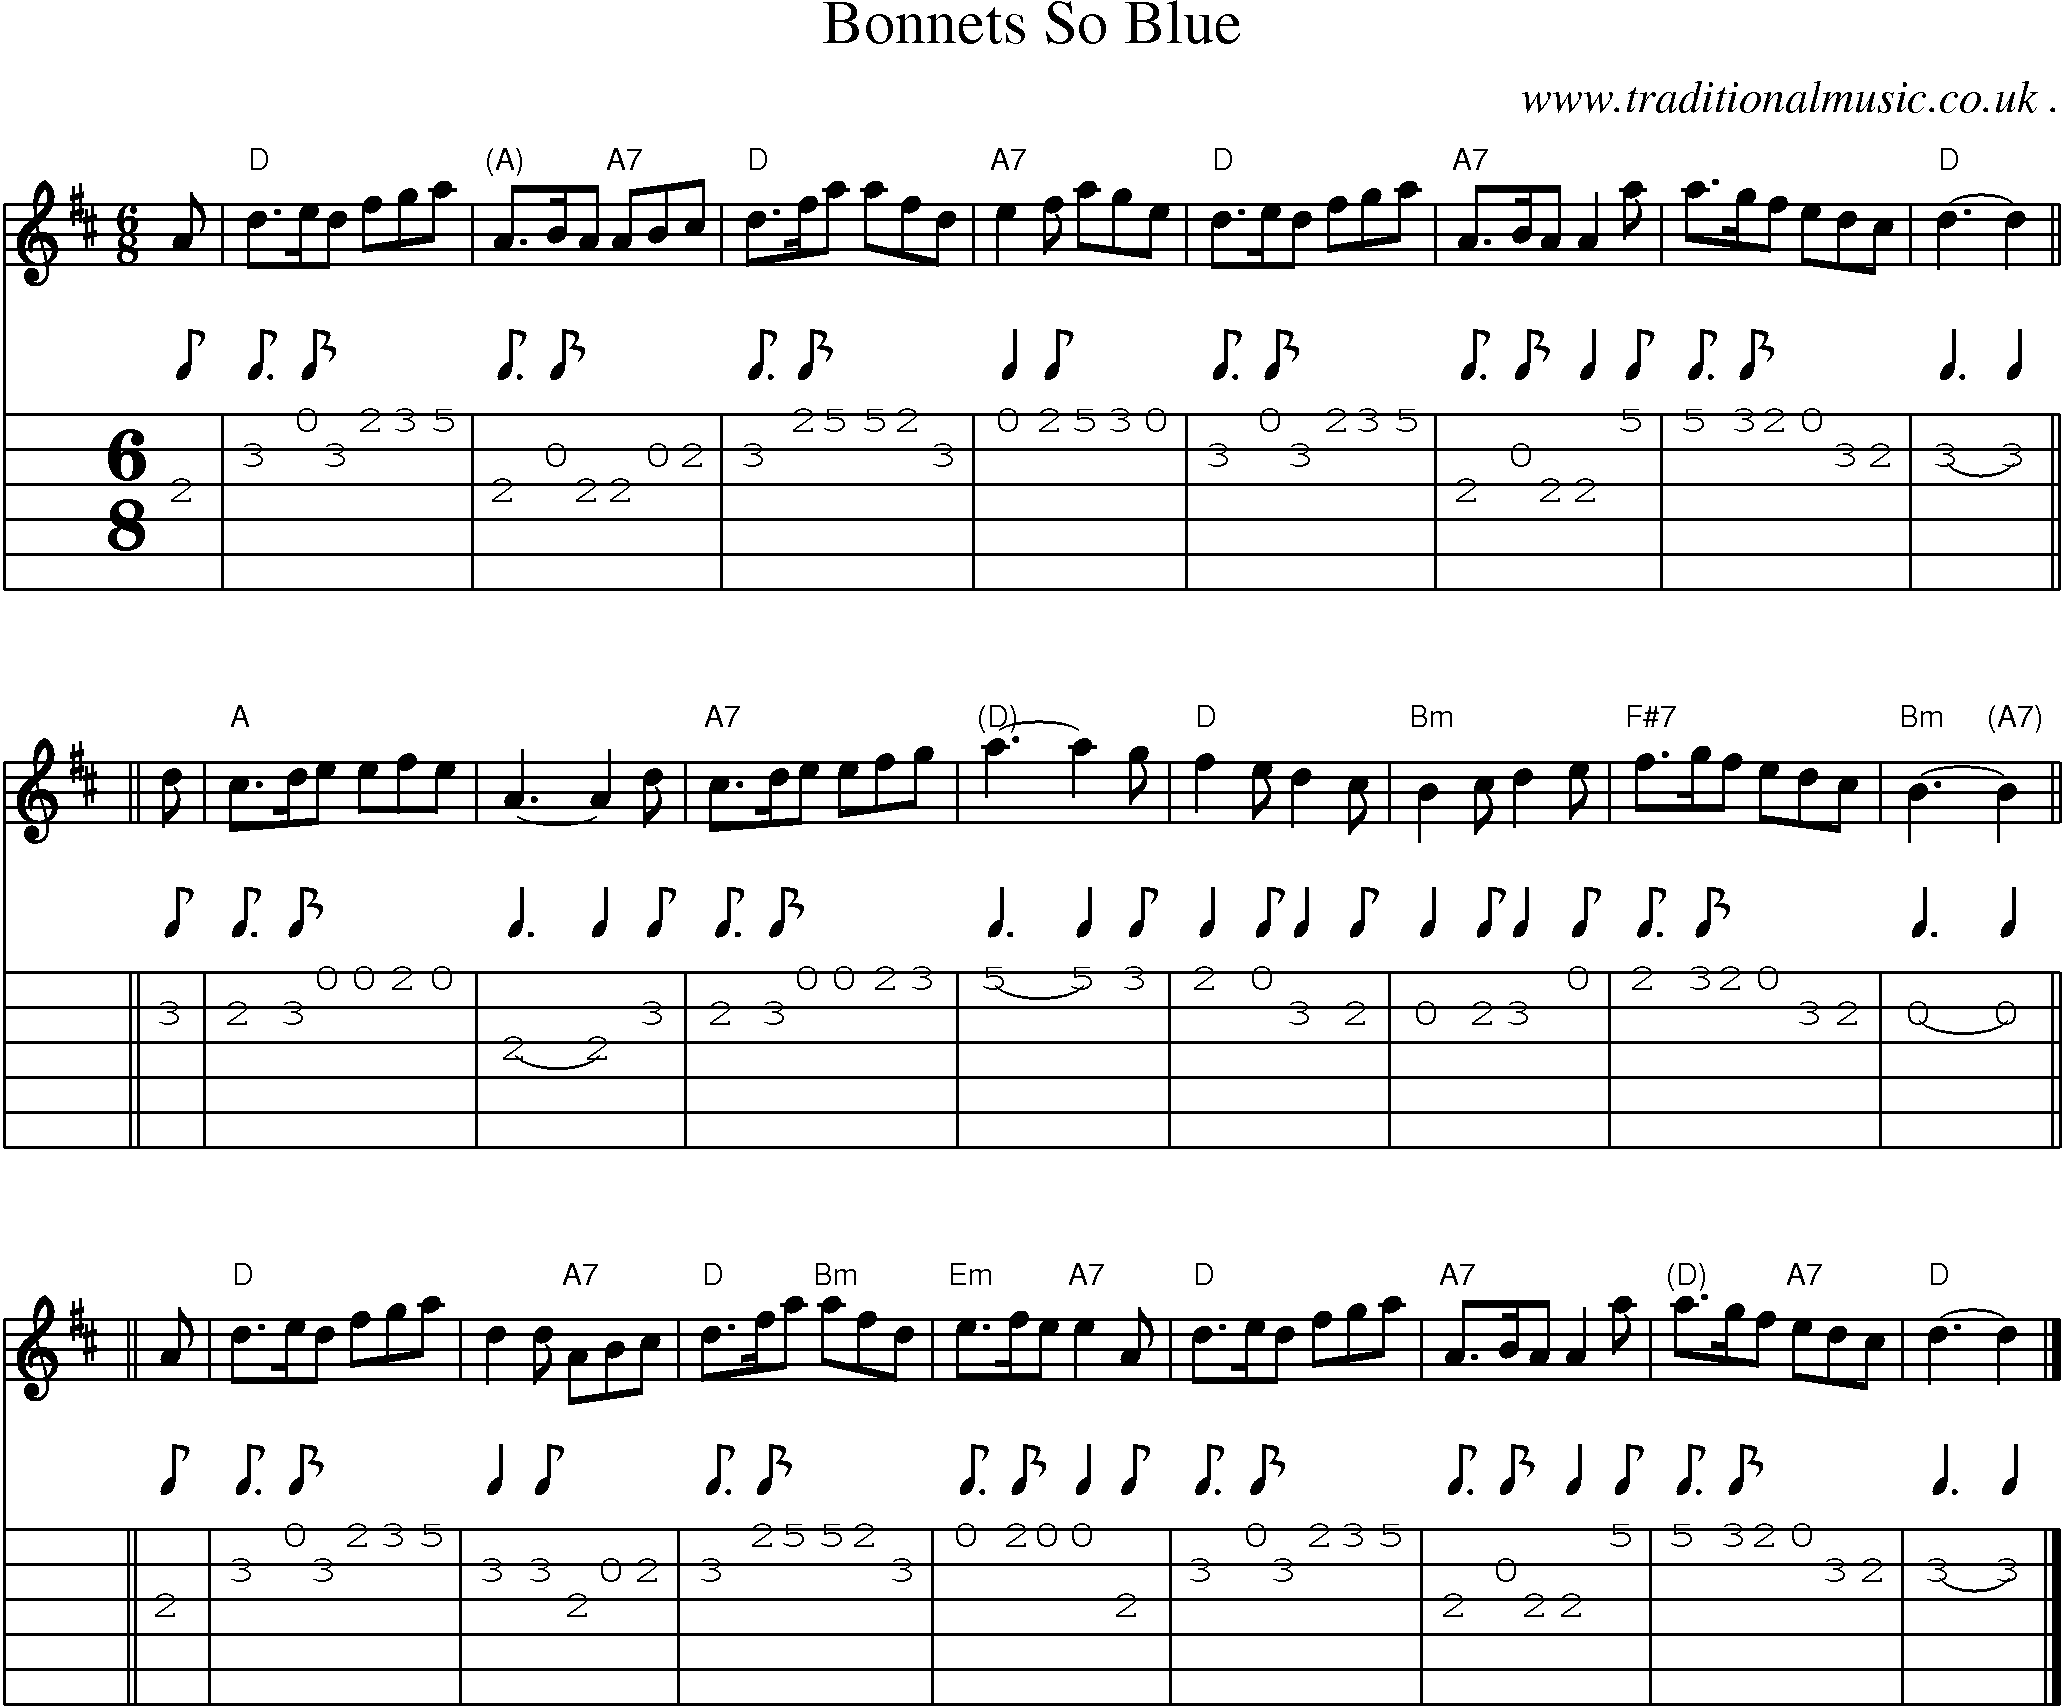 Sheet-music  score, Chords and Guitar Tabs for Bonnets So Blue